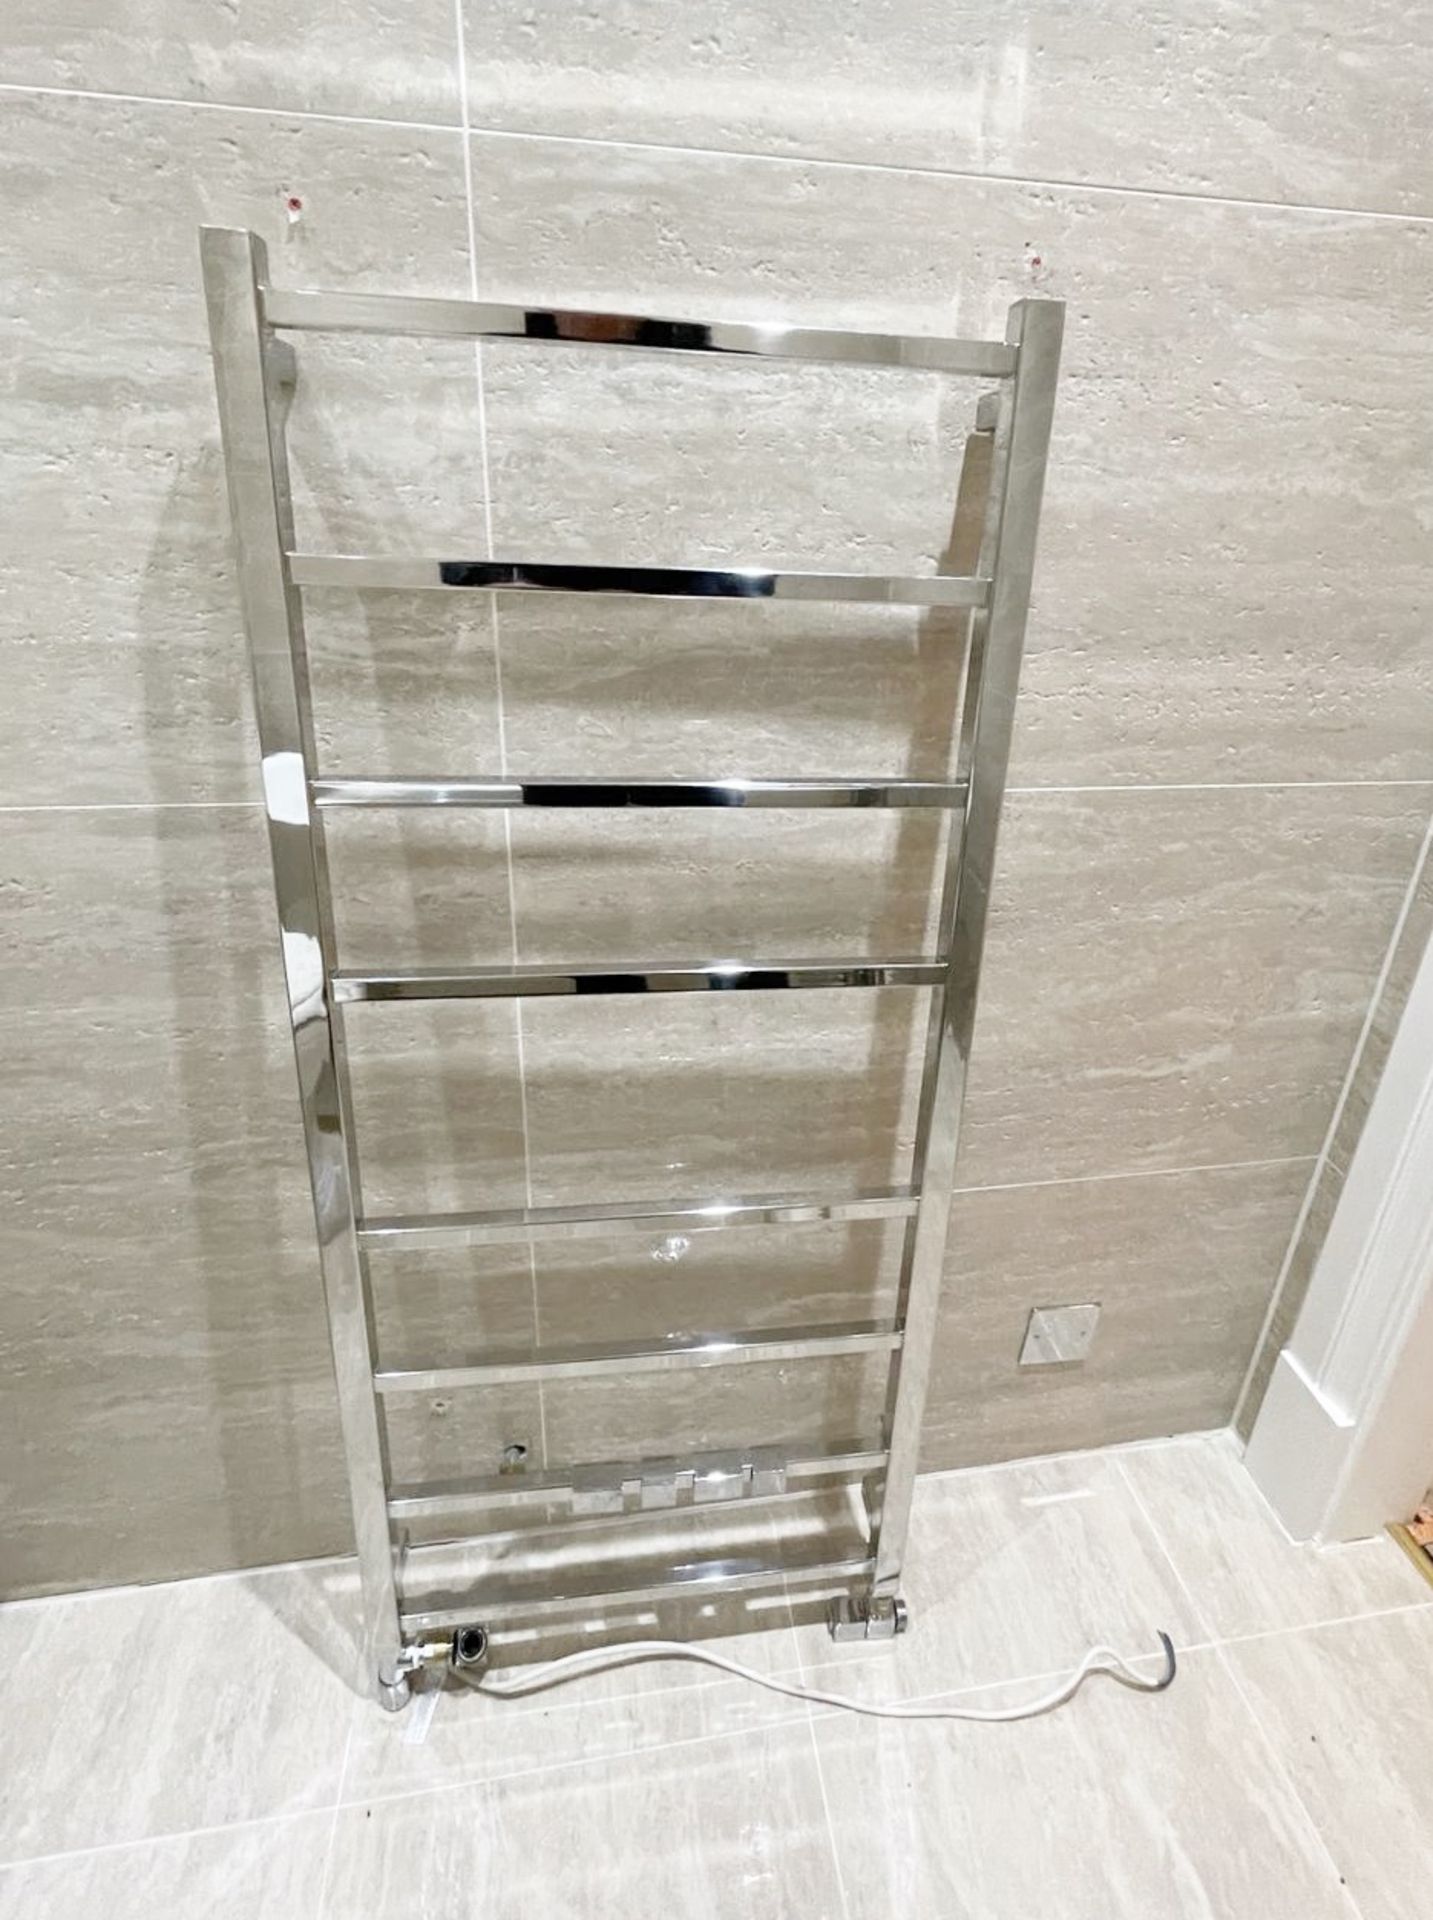 1 x Premium Towel Radiator in Chrome - Ref: FRNT/BD - CL896 - NO VAT ON THE HAMMER - Location: - Image 3 of 3